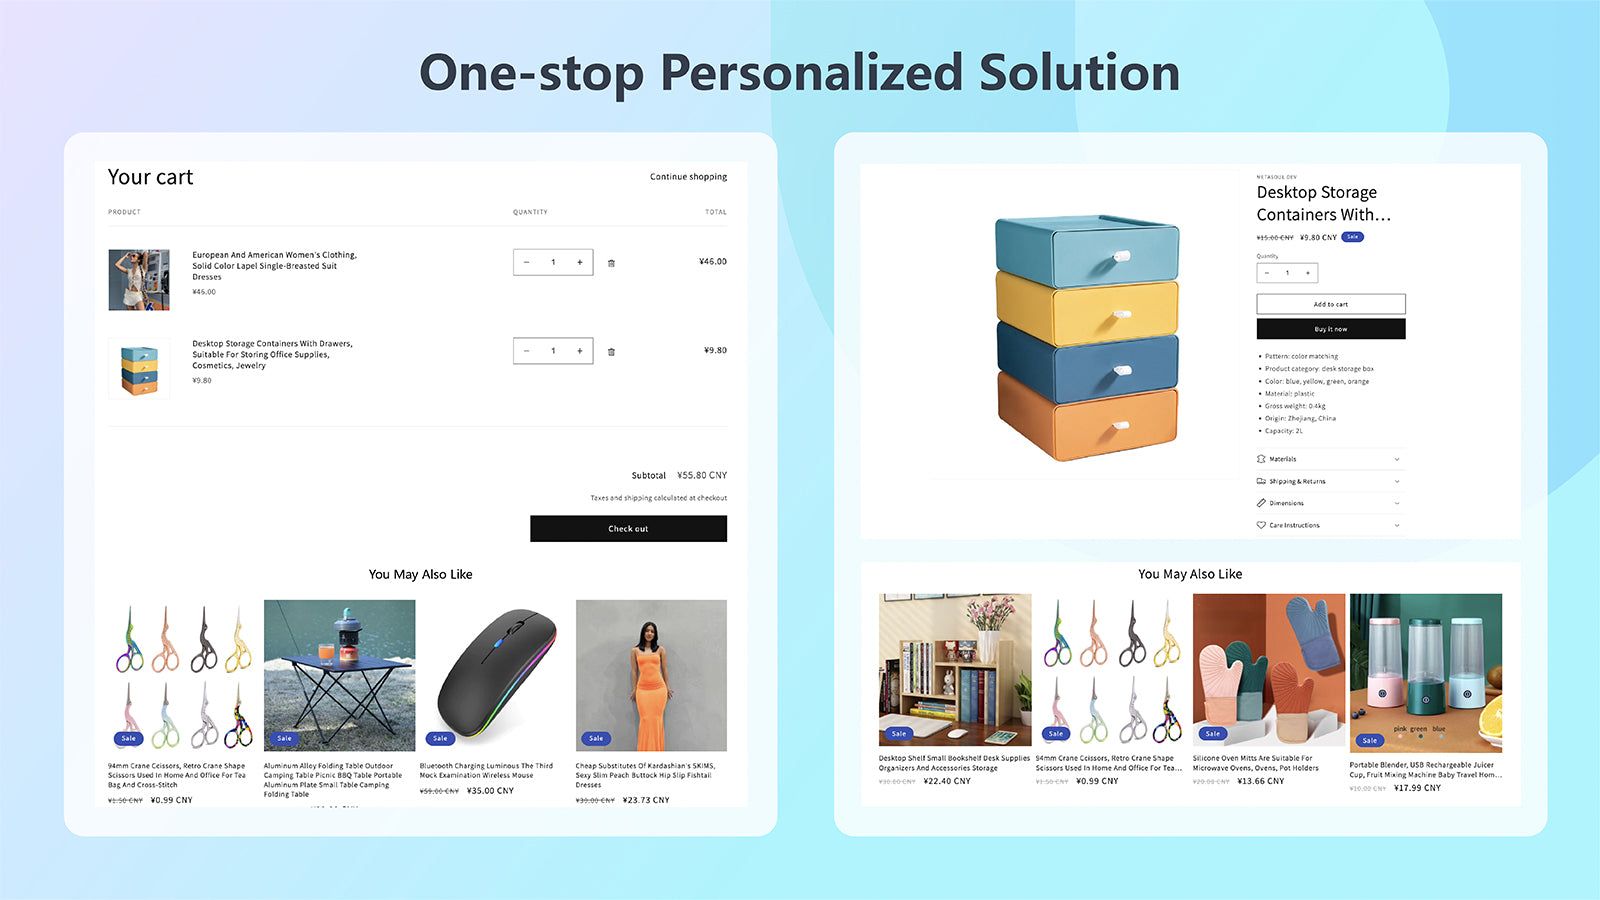 One-stop Personalized Solution